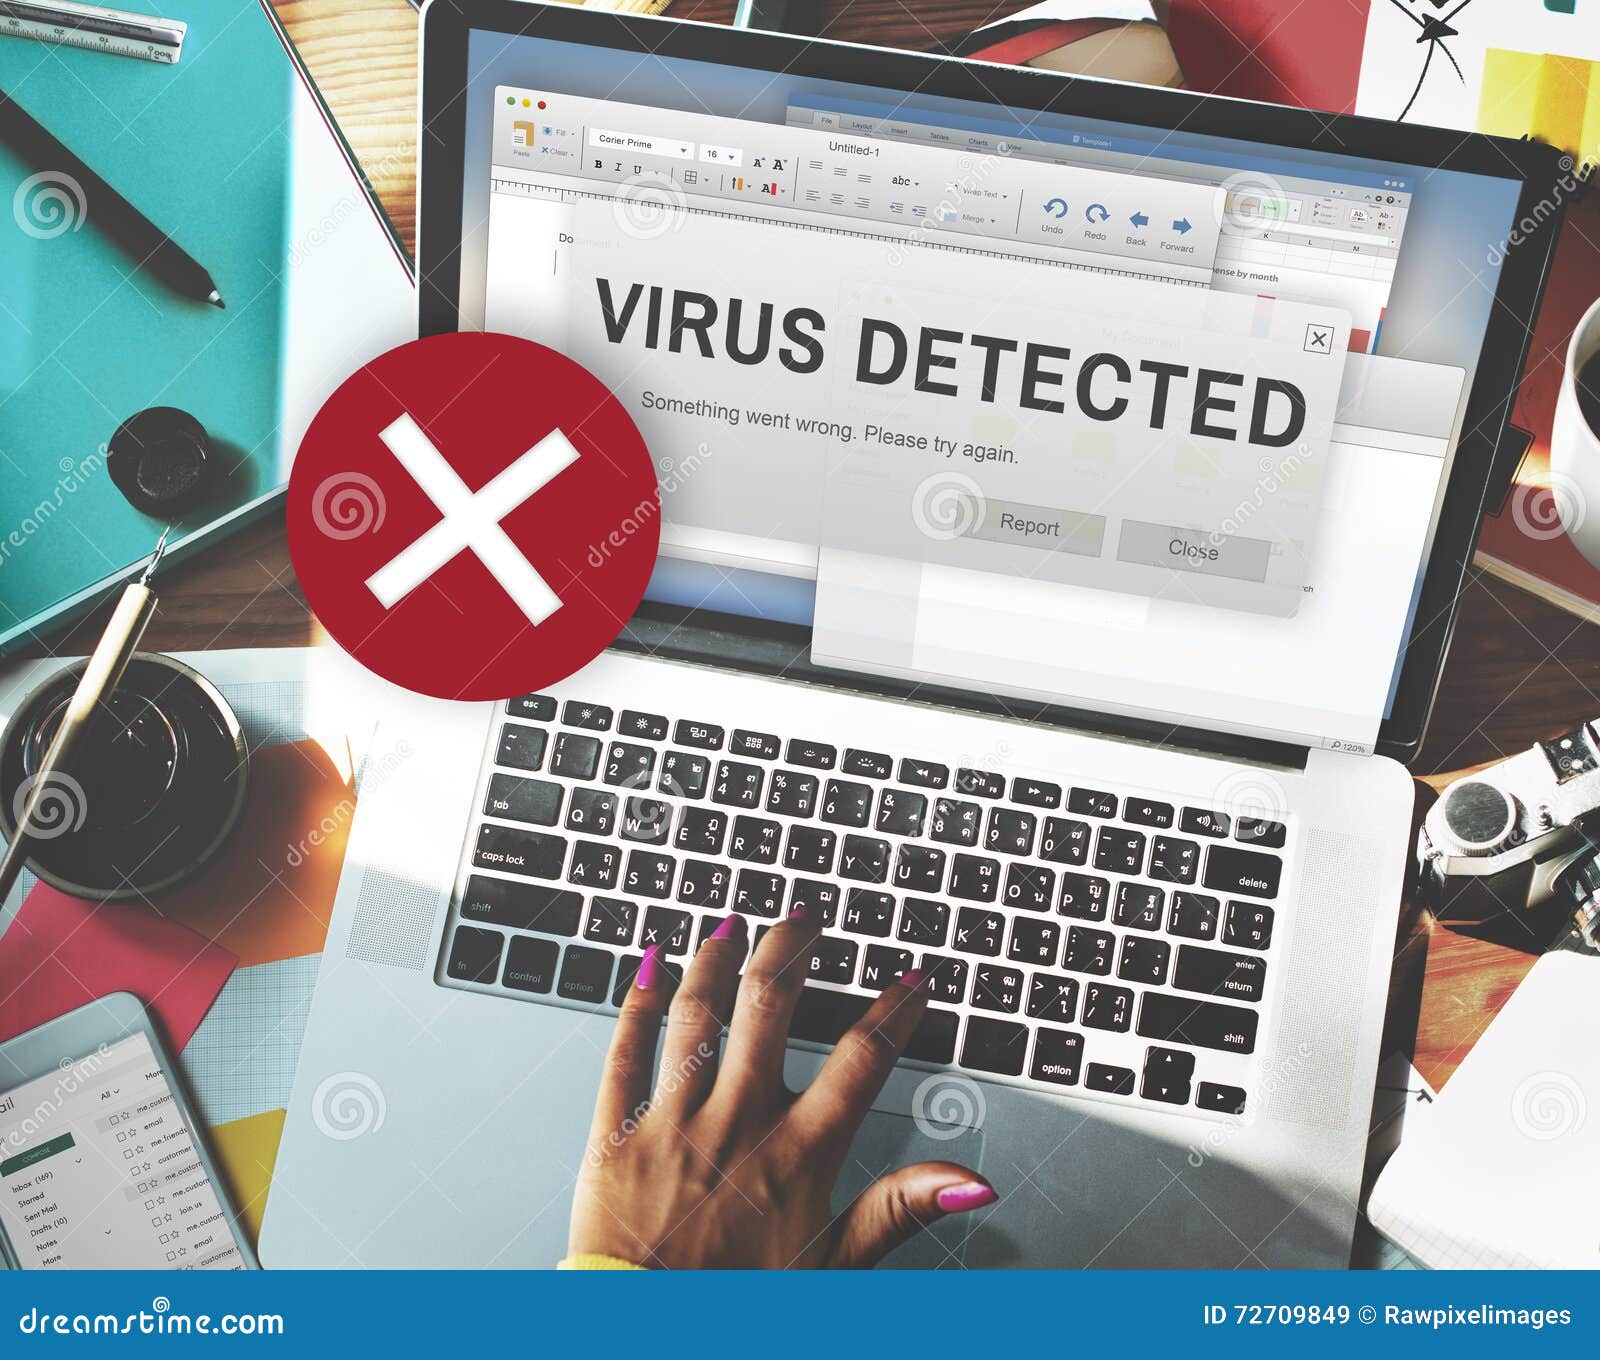 unsecured virus detected hack unsafe concept